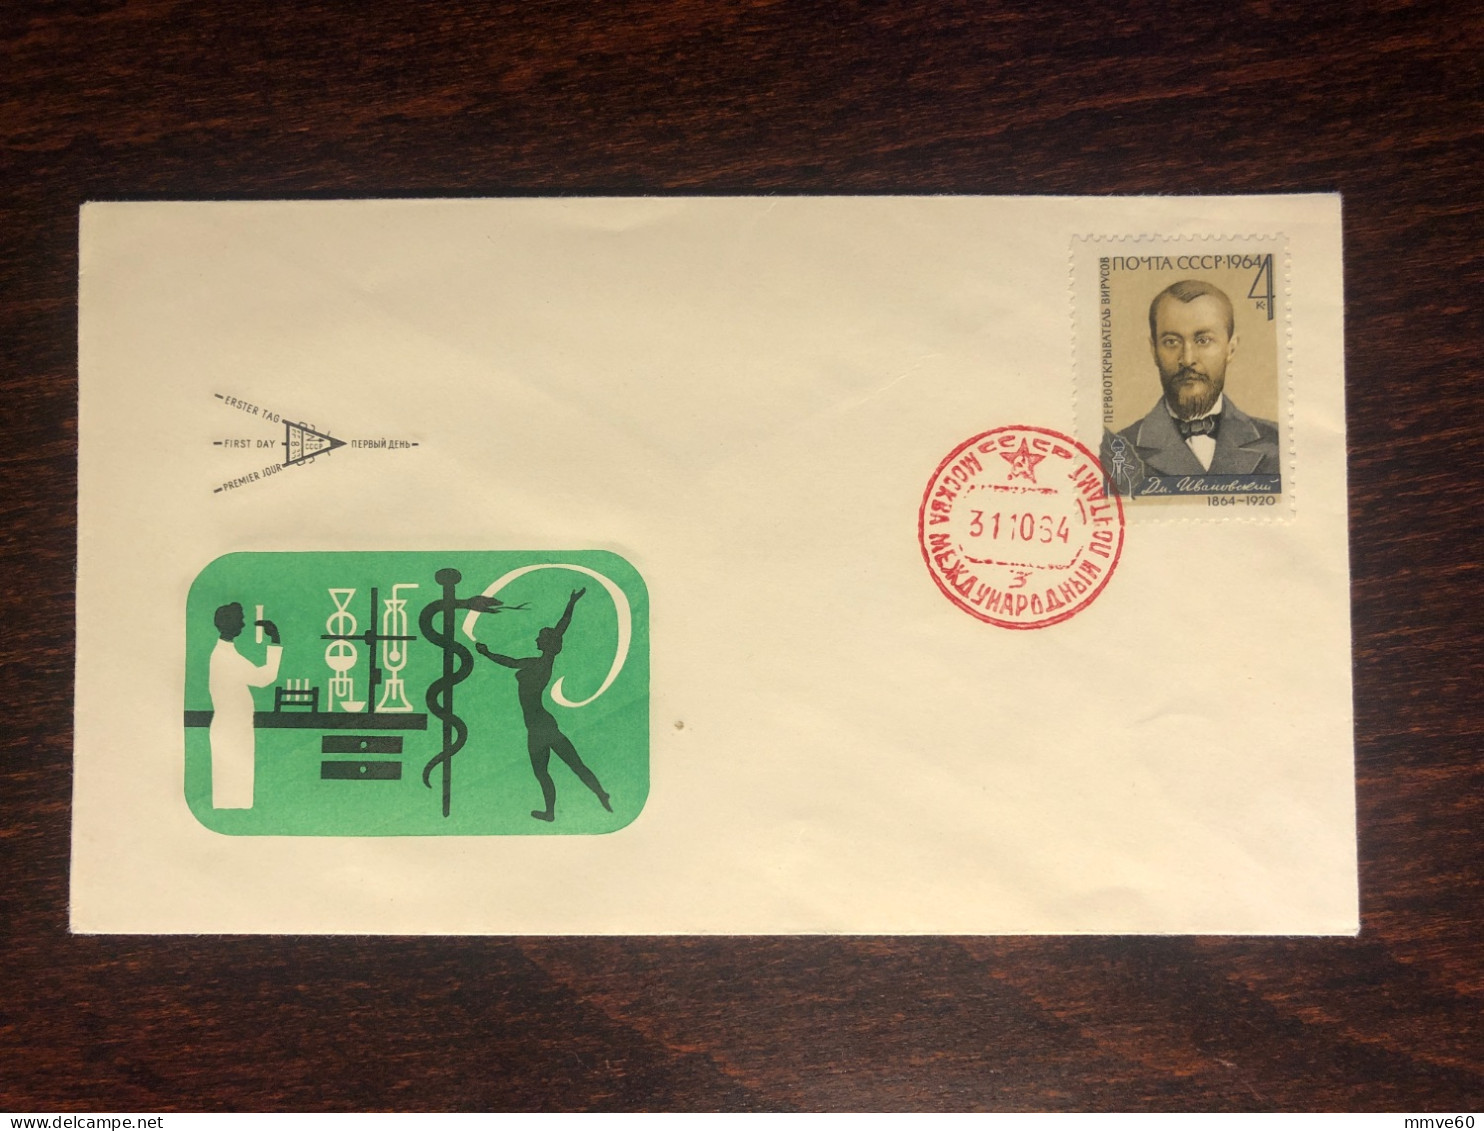 RUSSIA USSR FDC COVER 1964 YEAR IVANOVSKY VIROLOGY BACTERIOLOGY HEALTH MEDICINE STAMPS - Cartas & Documentos